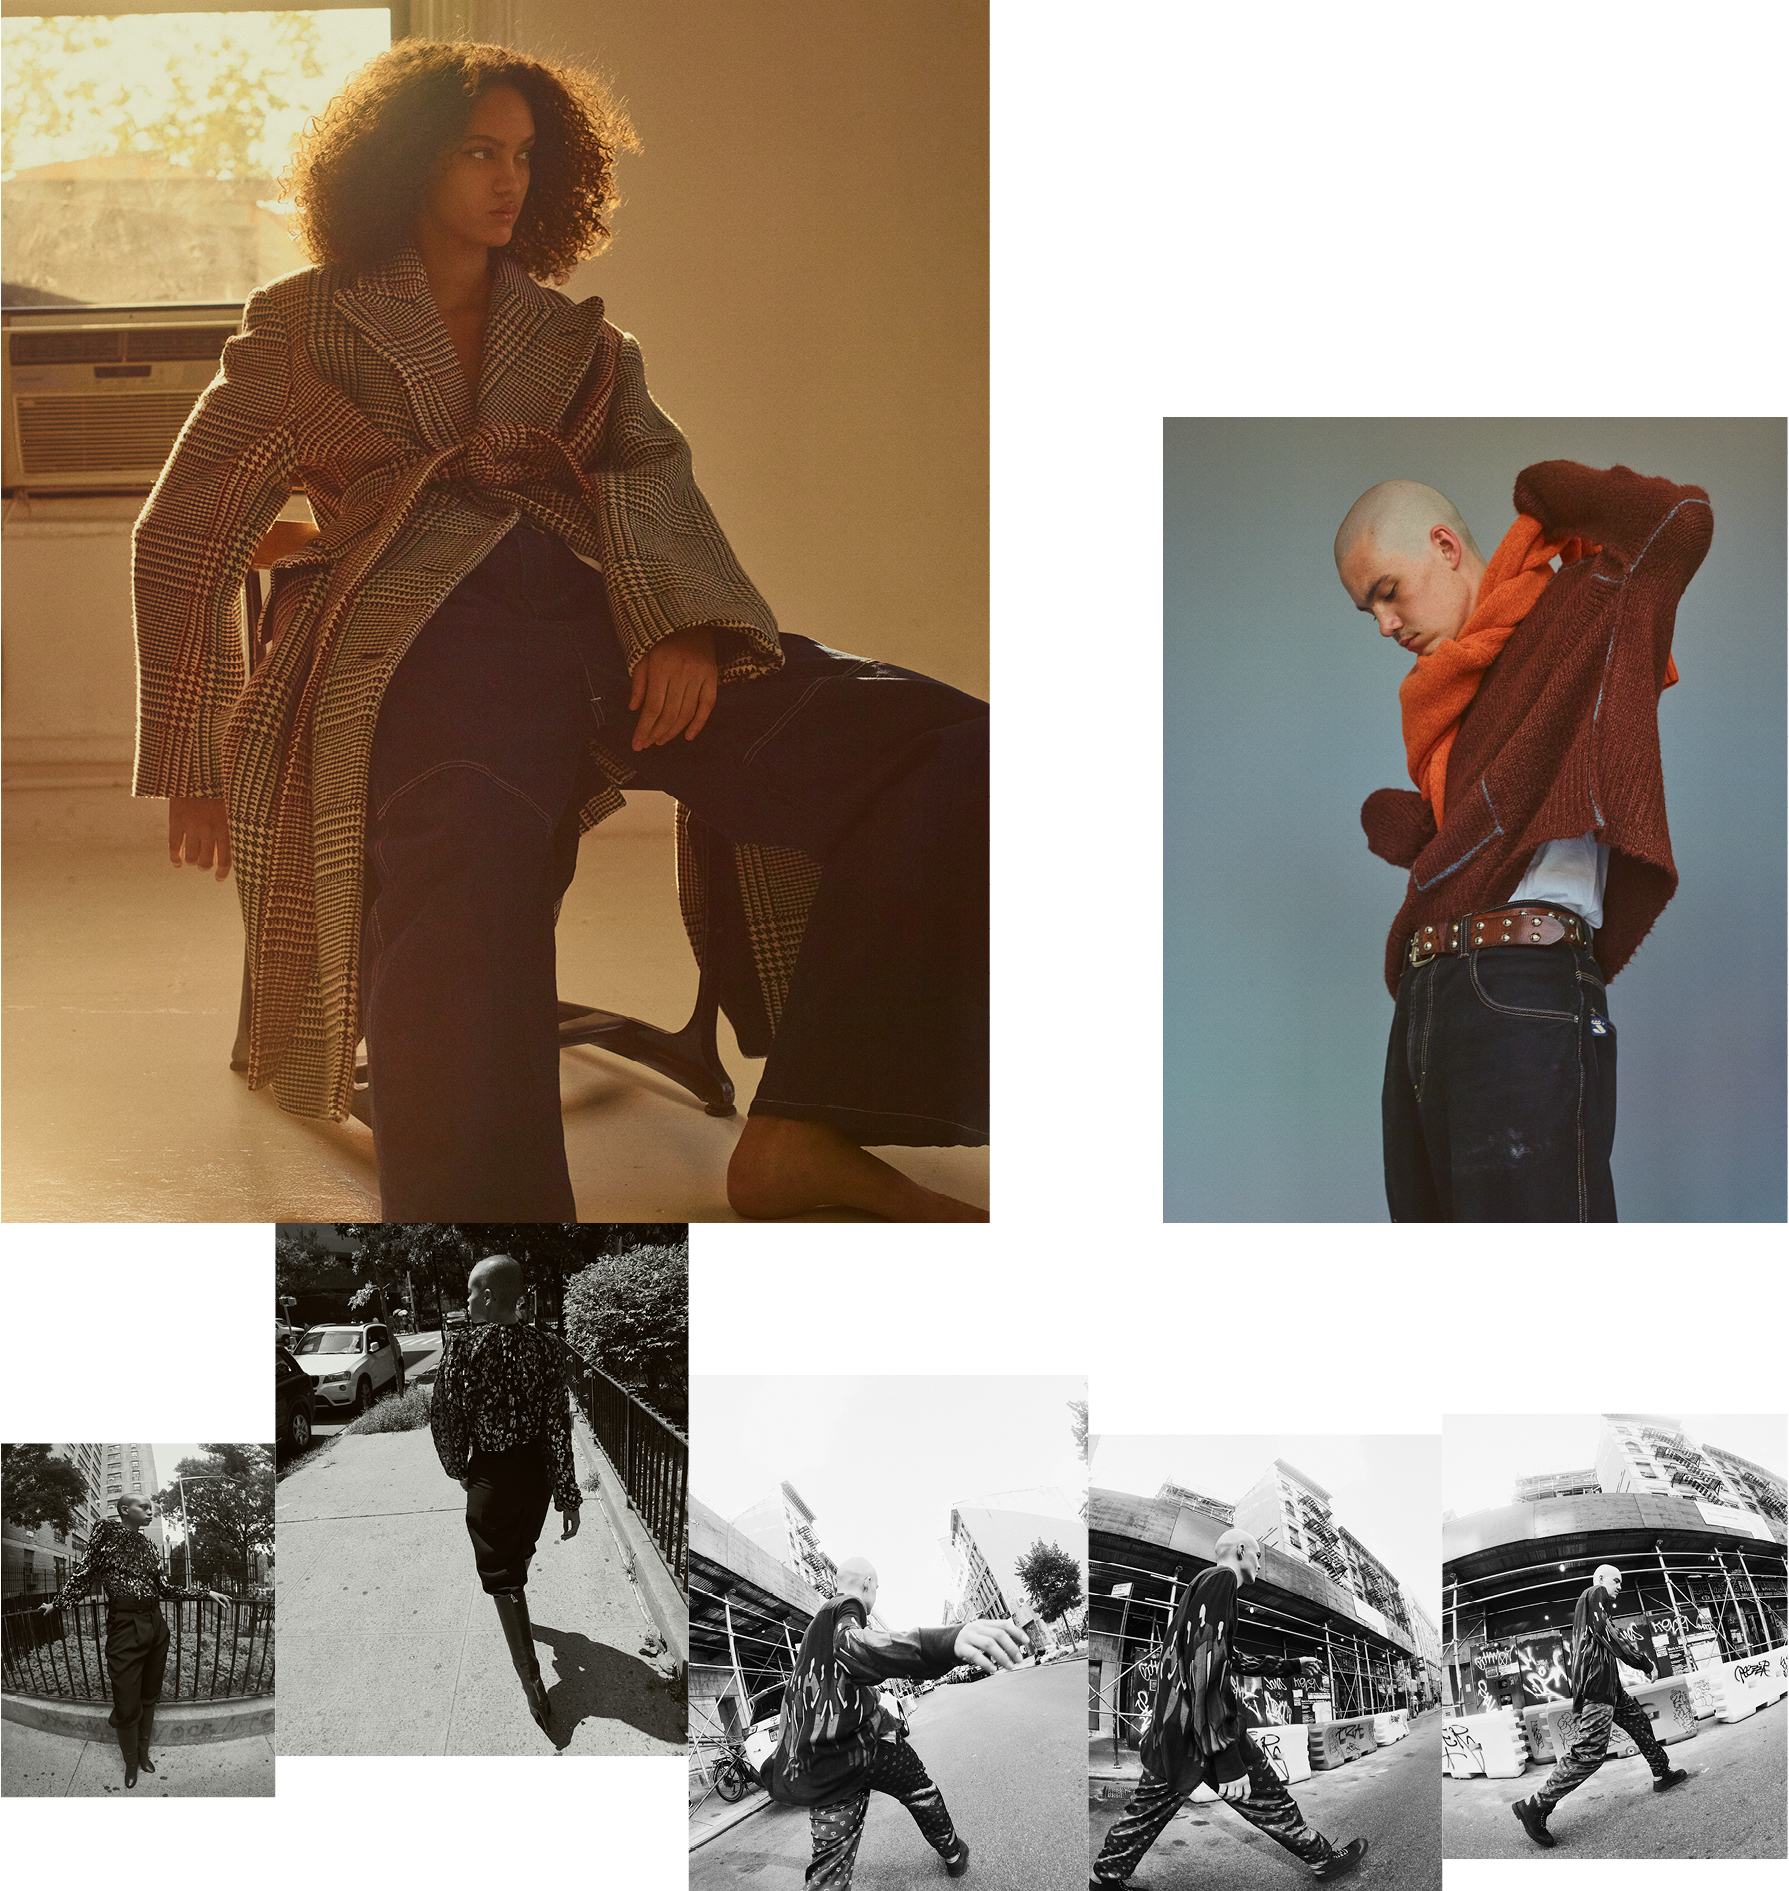 Clockwise from top left: Figueroa wears coat by Stella McCartney. Vintage jeans from Resurrection Vintage, New York. Raeder wears sweater by Acne Studios. Sweater, worn around neck, by Federico Curradi. Jeans and belt, model’s own.Raeder wears top by Federico Curradi. Trousers by Bode. Shoes by Salvatore Ferragamo.Fitz wears top by Saint Laurent. Trousers by Dries Van Noten. Boots by Akris.